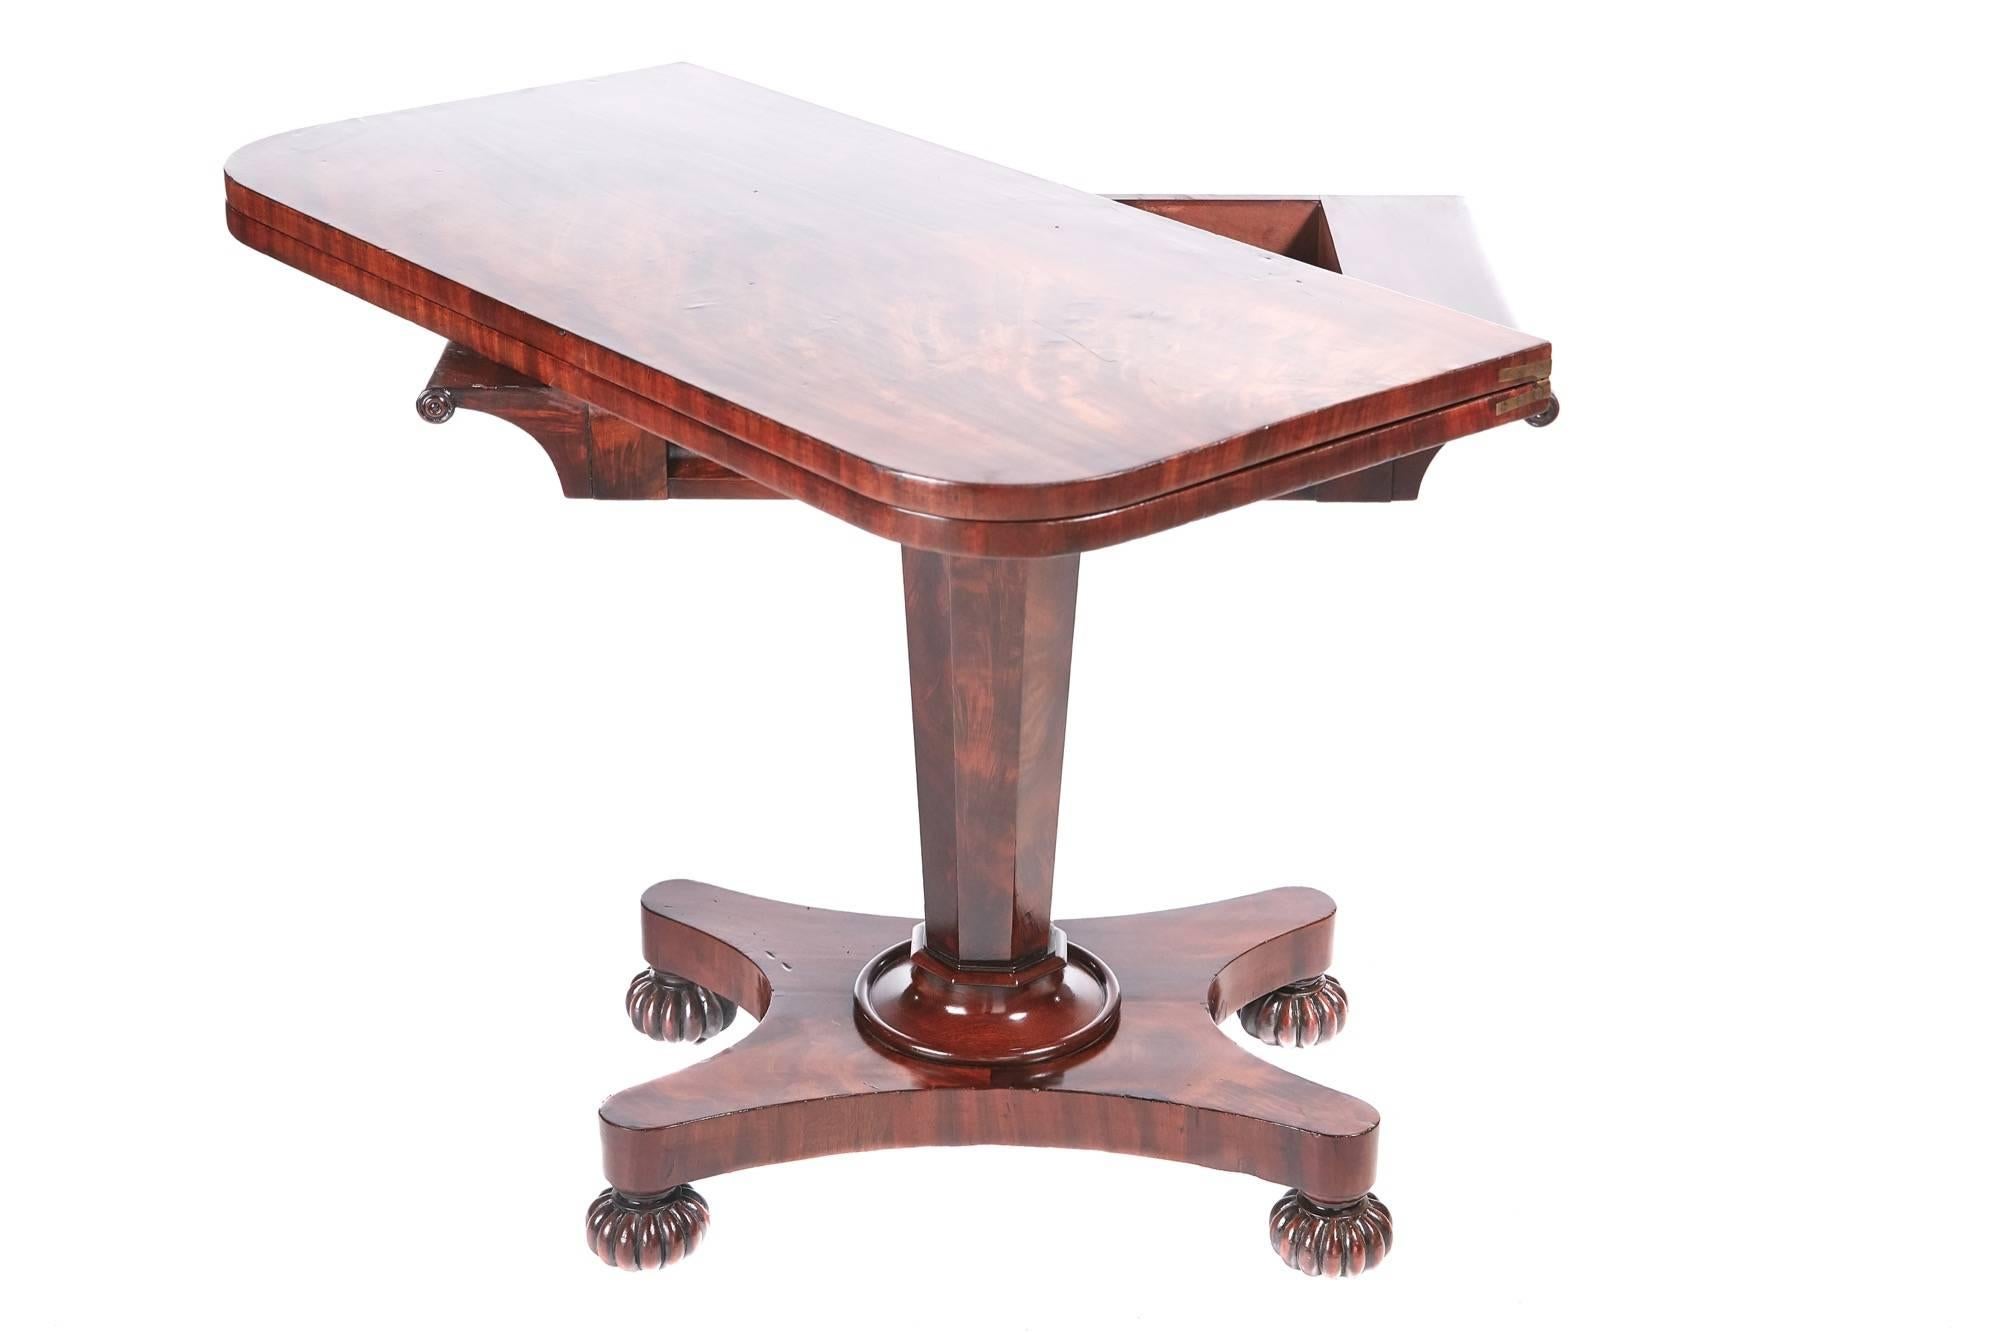 Quality victorian mahogany card table, with a lovely mahogany top that lifts up and swivels to reveal a green baize interior,lovely shaped frieze supported by a shaped turned pedestal with a collar finishing on a quatrefoil base with reeded ball